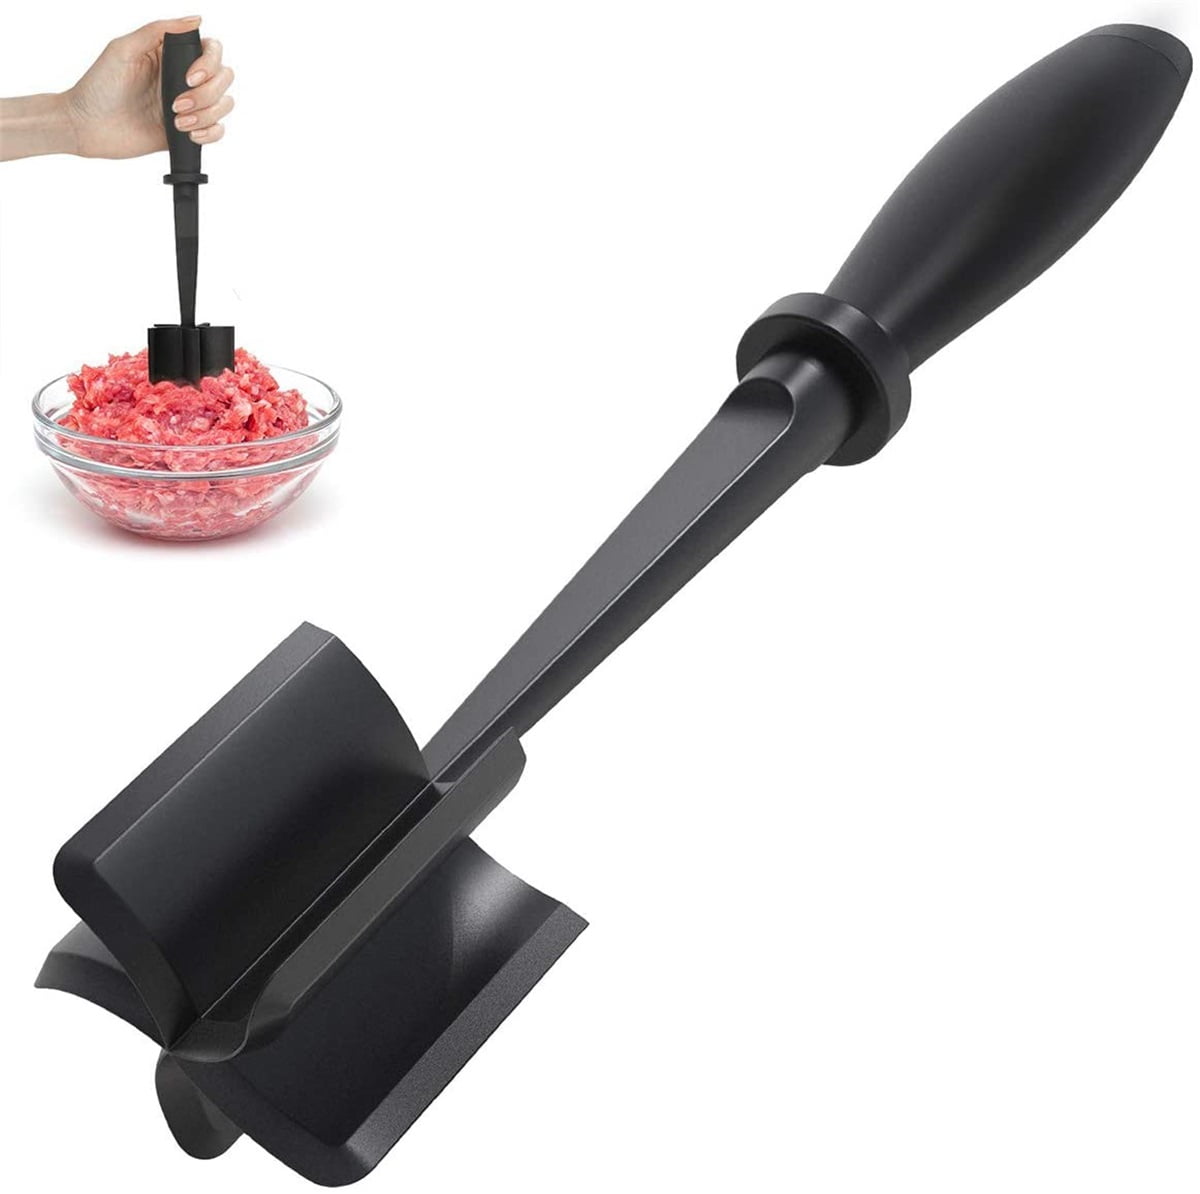 Black Meat Masher Chopper Heat-Resistant Minced Meat Chopper 25cm Nylon Meat Tenderizer Suitable for Chopping and Mixing Minced Meat. 